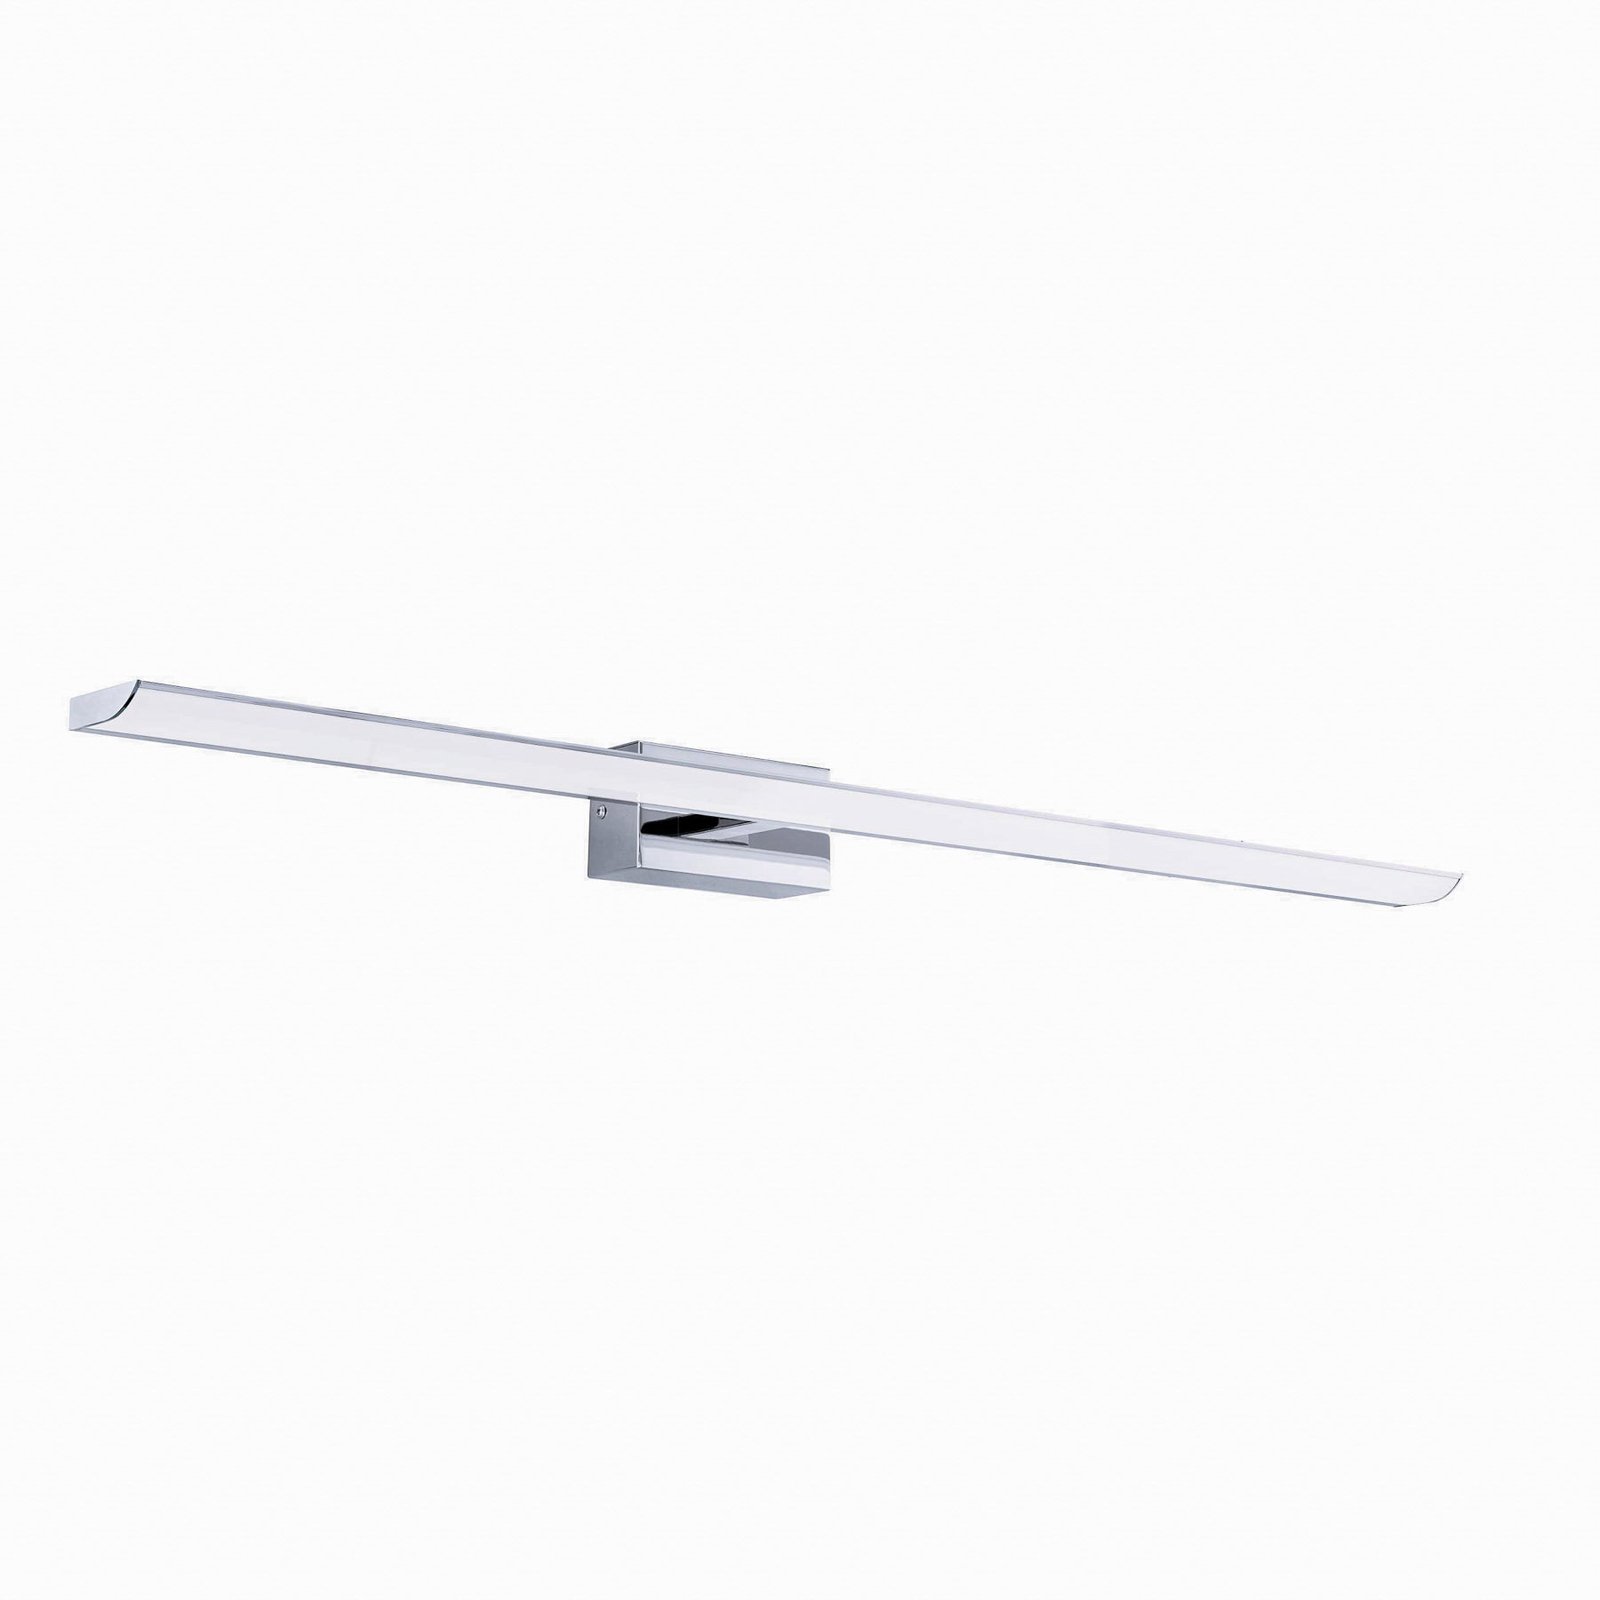 EGLO connect Tabiano-Z LED-spejllampe 90,5cm